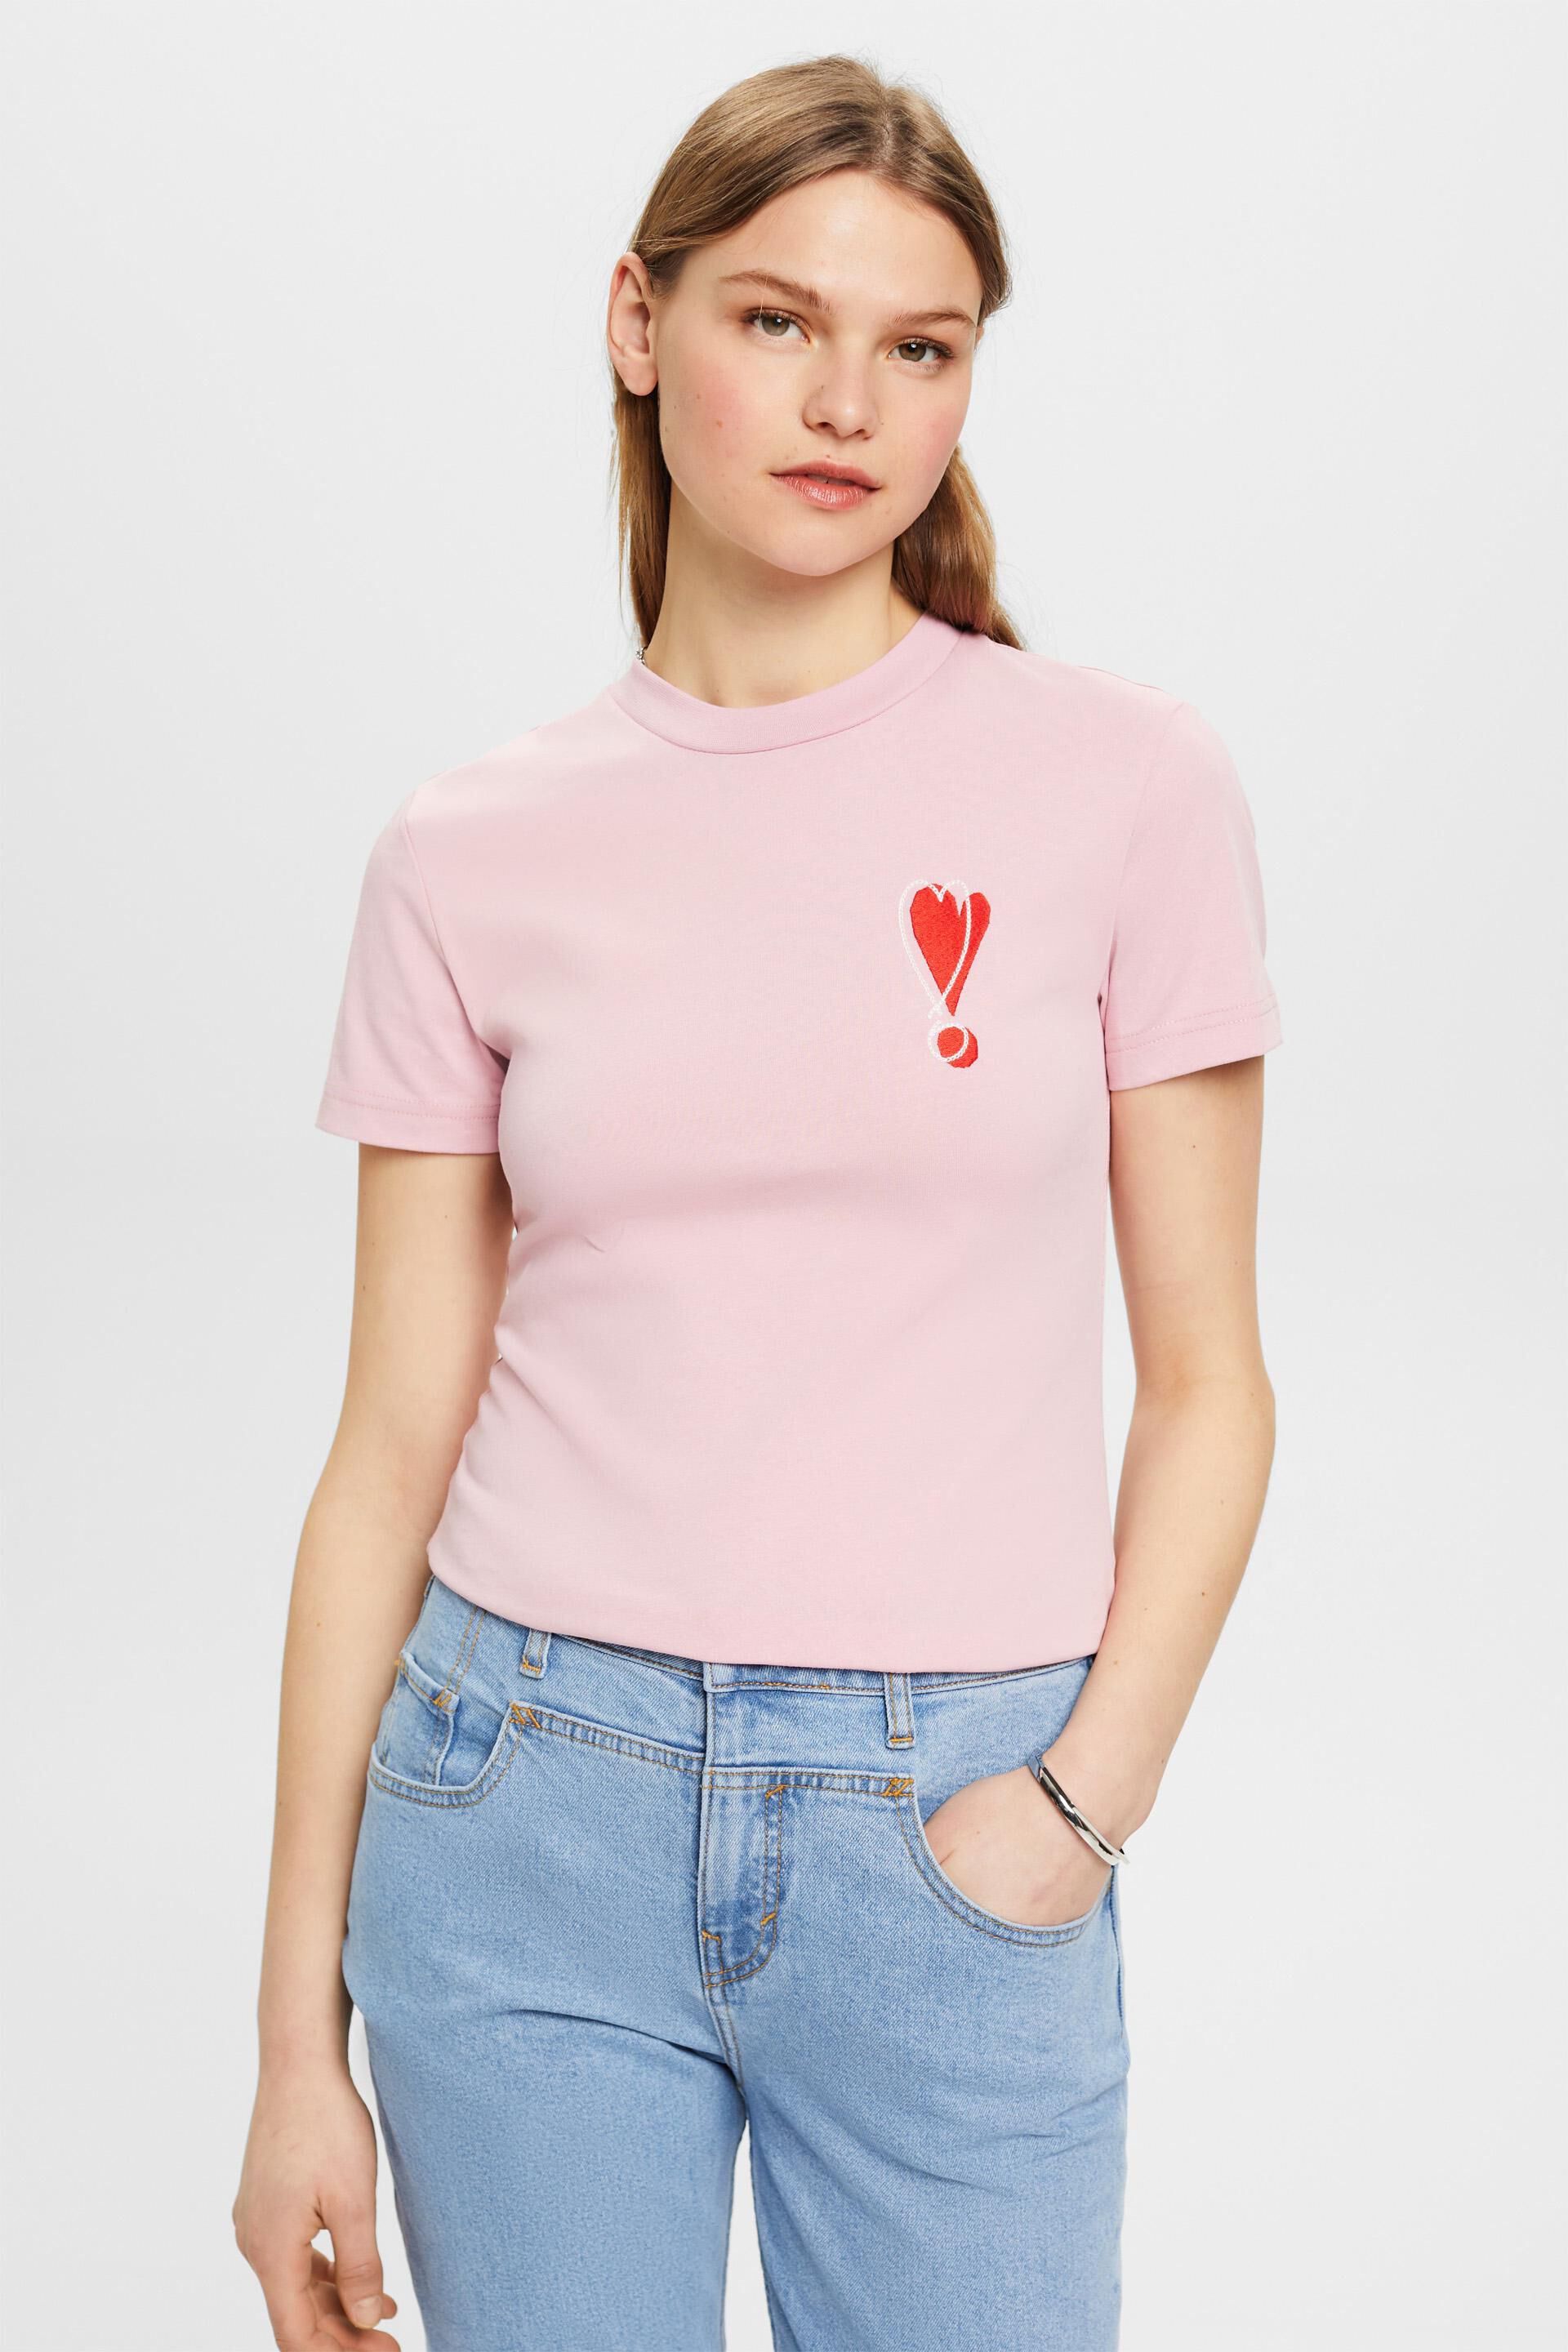 Esprit heart embroidered with T-shirt Cotton motif